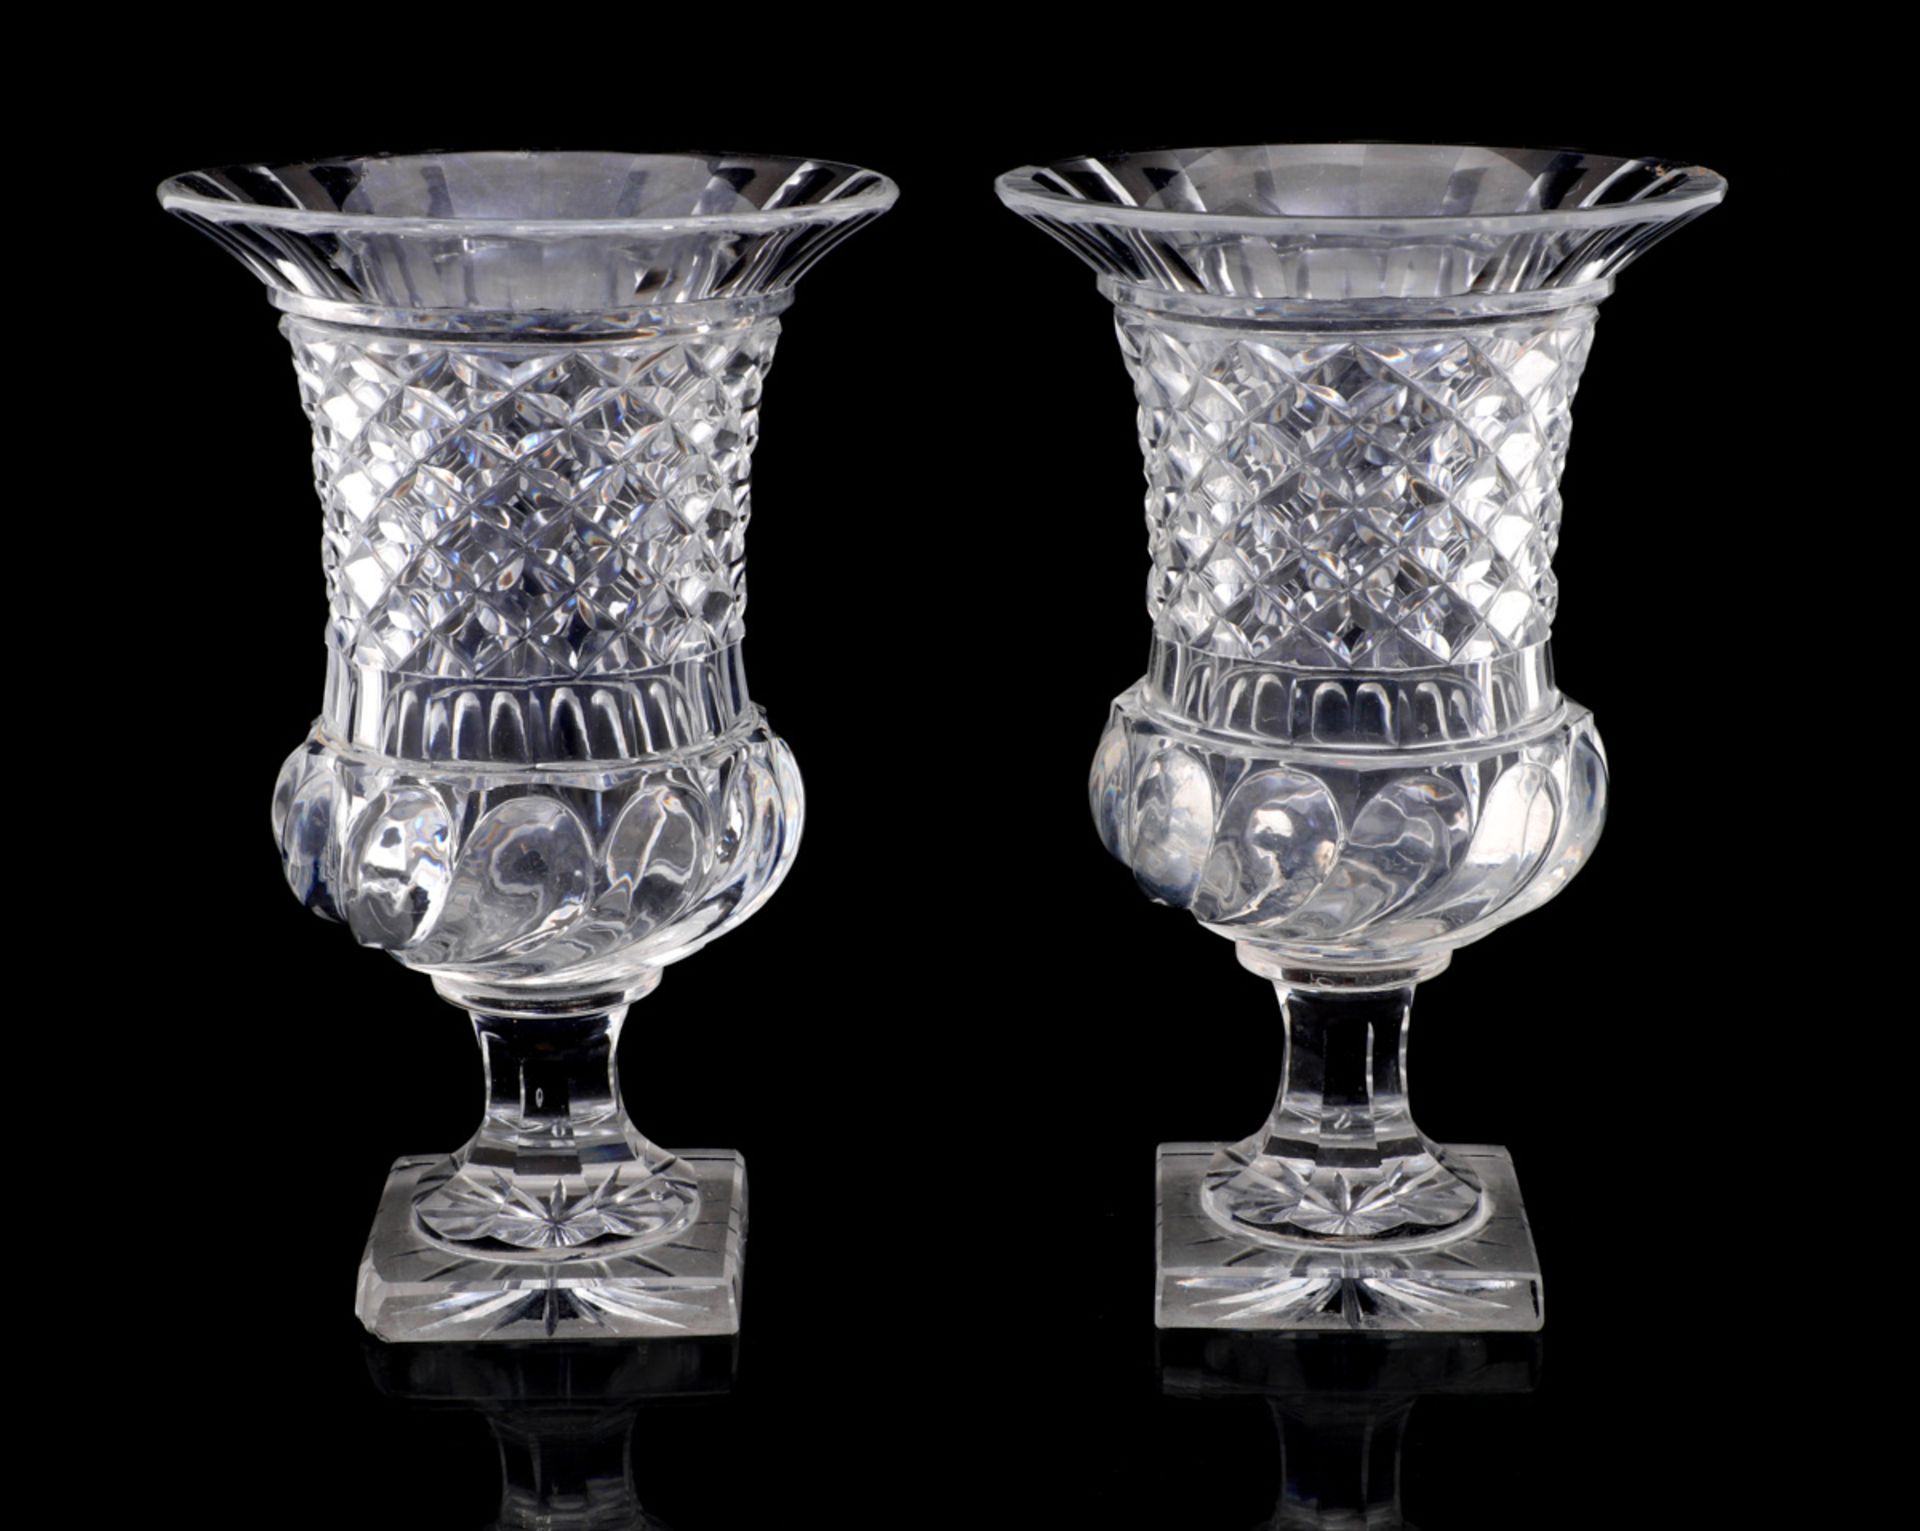 A PAIR OF BACCARAT VASES Baccarat crystal, 19th Century. Slight chips, signs of wear and one cut